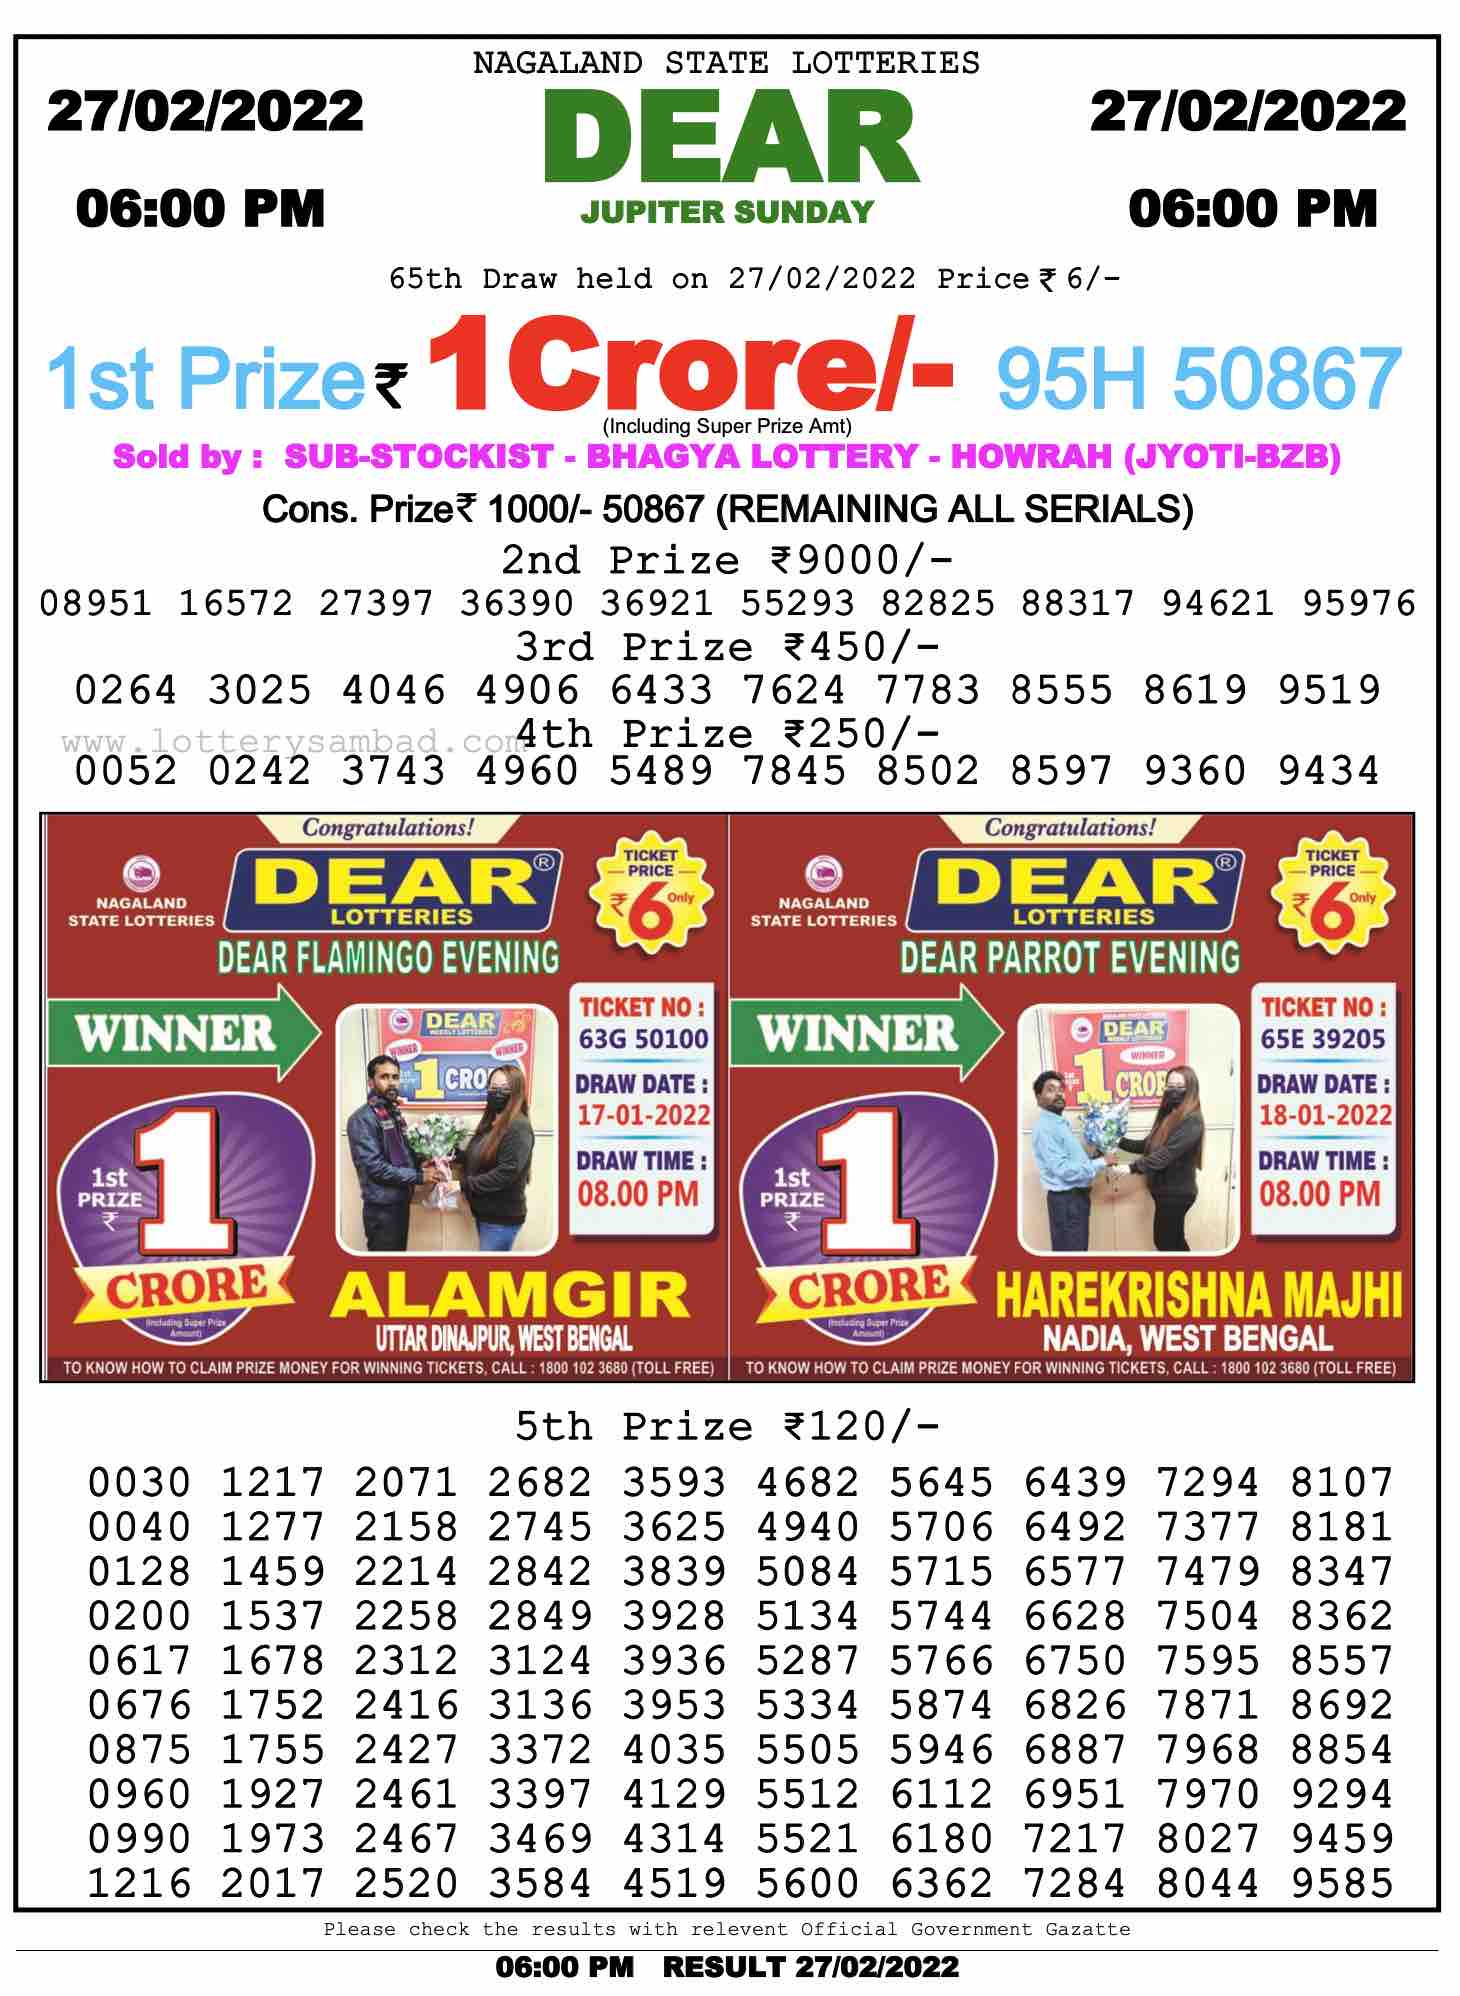 Dear Lottery Nagaland state Lottery Results 6.00 PM 27.02.2022